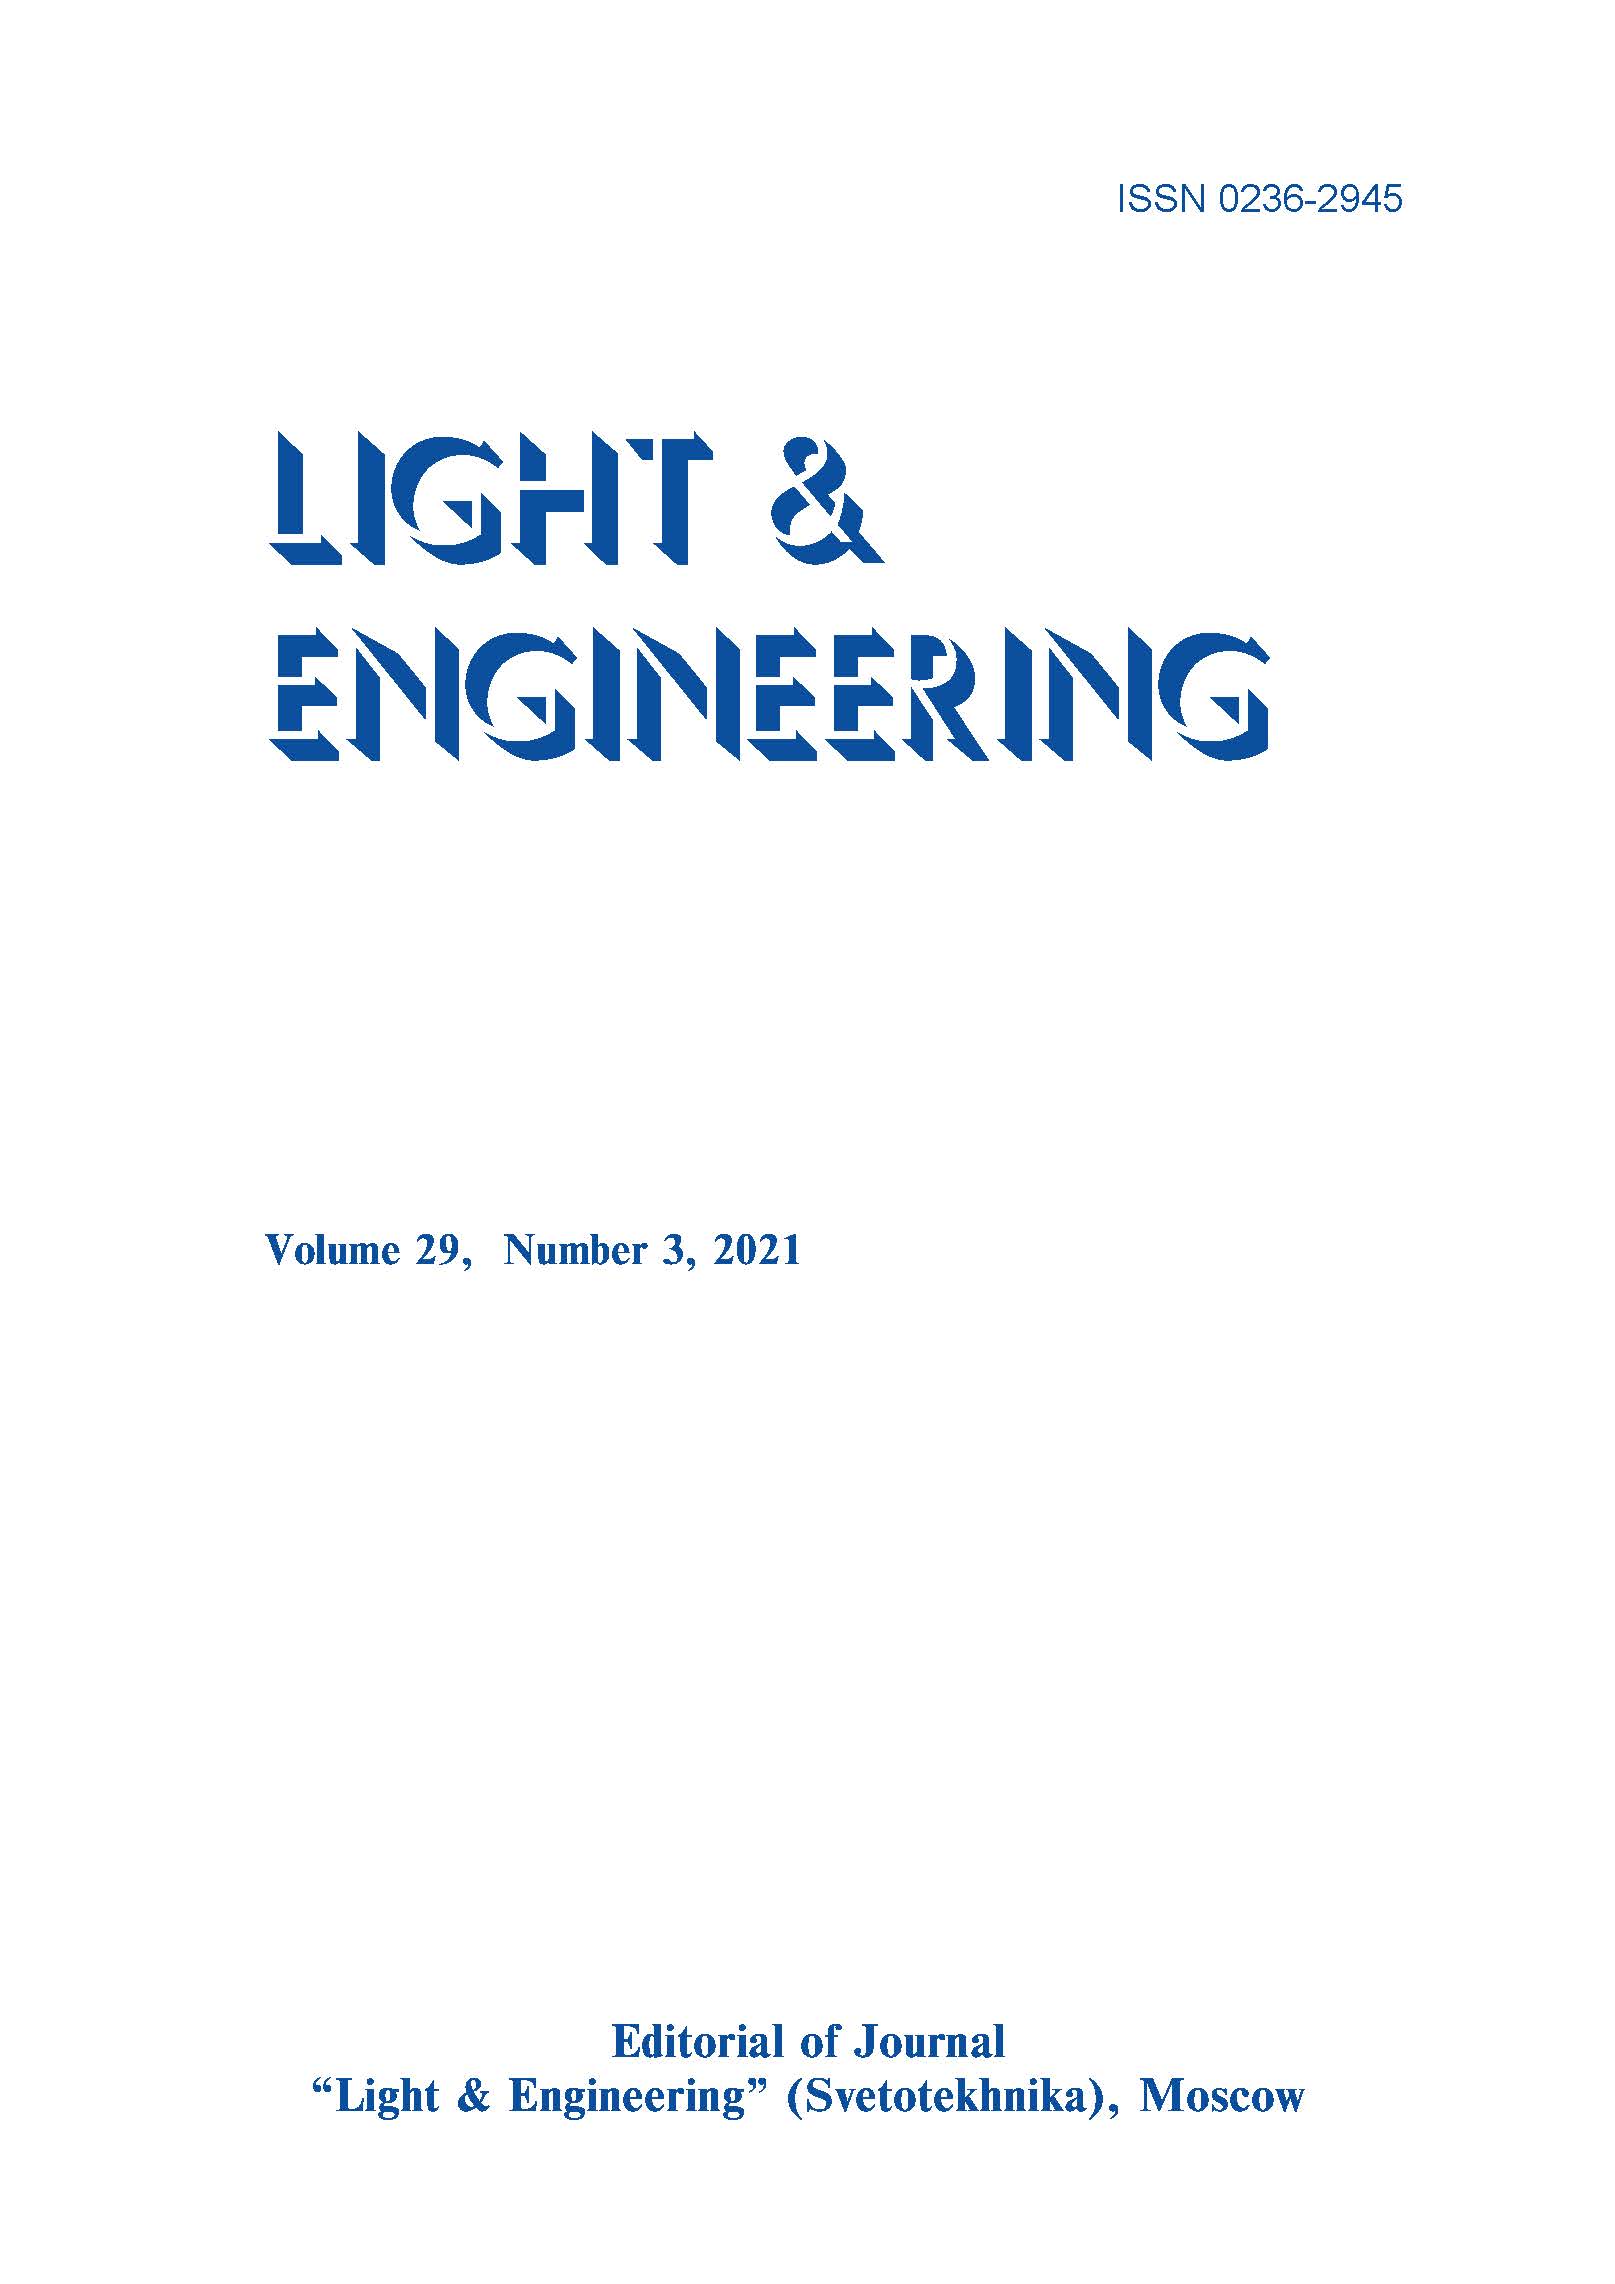 High Quality Light From Ardatov Light and Engineering Plant L&E, Vol. 29, No. 3, 2021